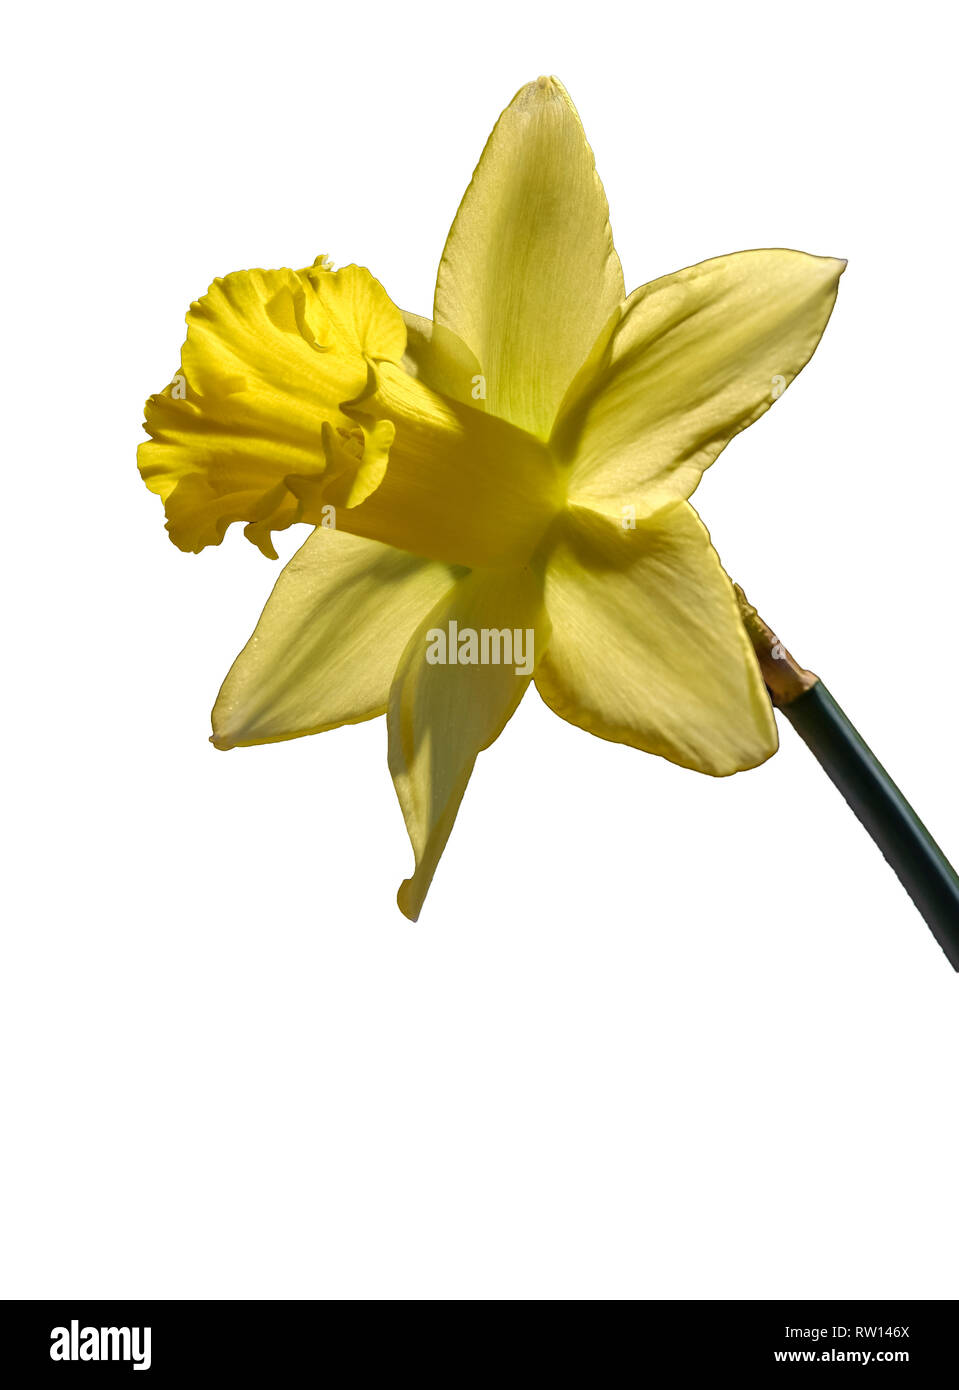 SINGLE DAFFODIL FLOWER ON CLEAR BACKGROUND. Stock Photo